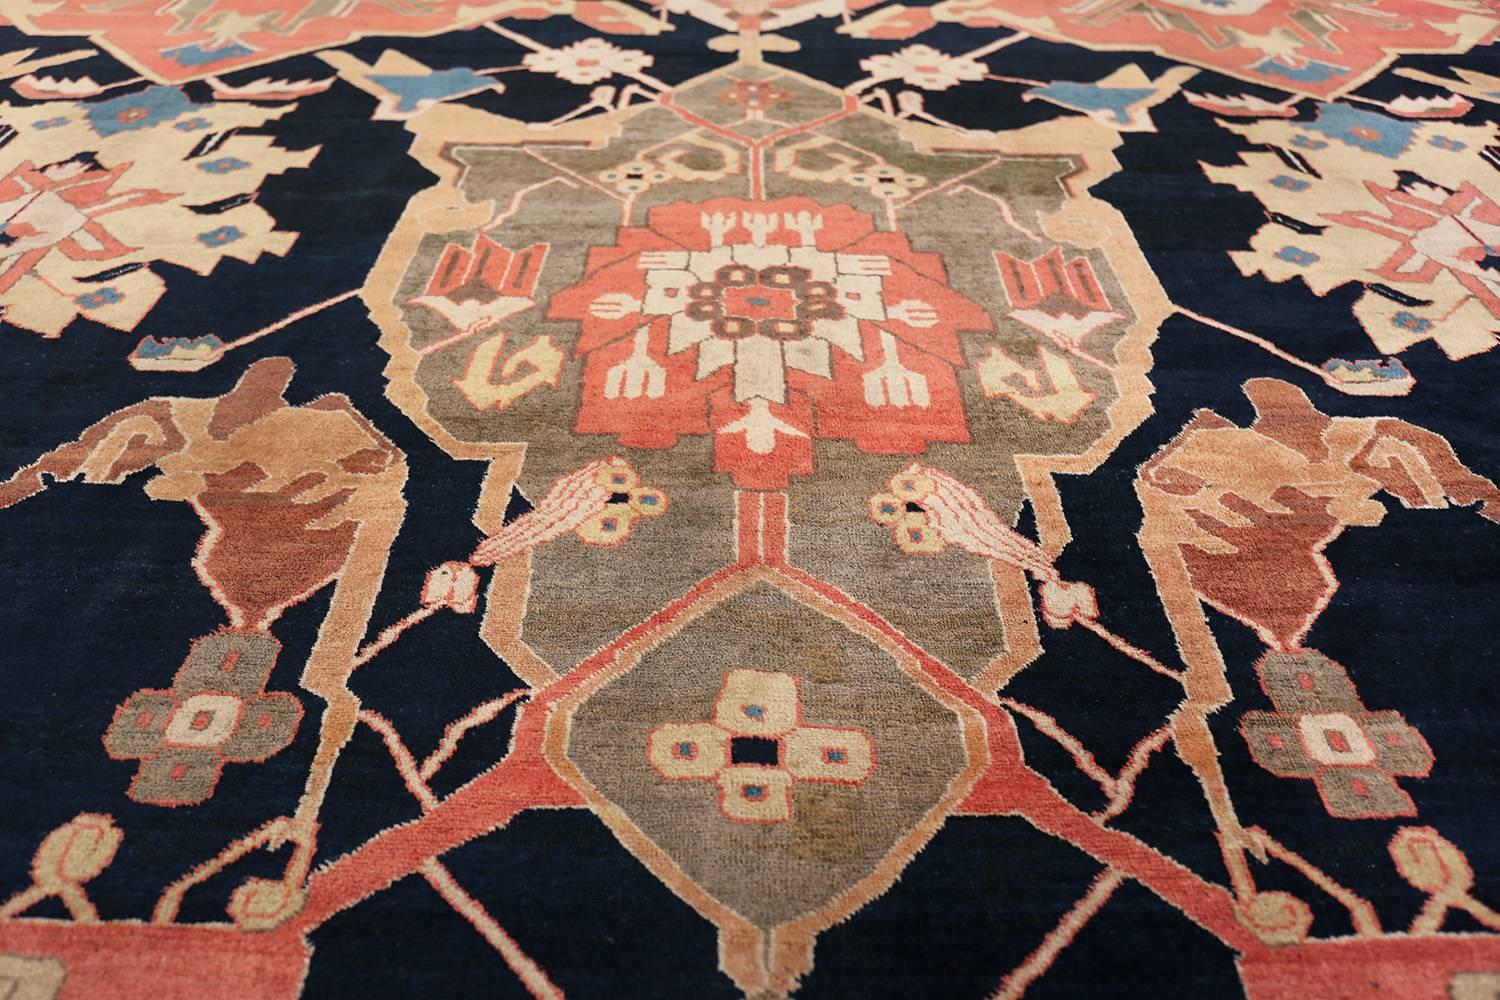 Magnificent and extremely fine antique Persian Petag Tabriz rug, country of origin / rug type: Persian rug, date circa 1920. Size: 9 ft 9 in x 14 ft 2 in (2.97 m x 4.32 m)

This vibrant Persian rug is all about the convergence of design and color.